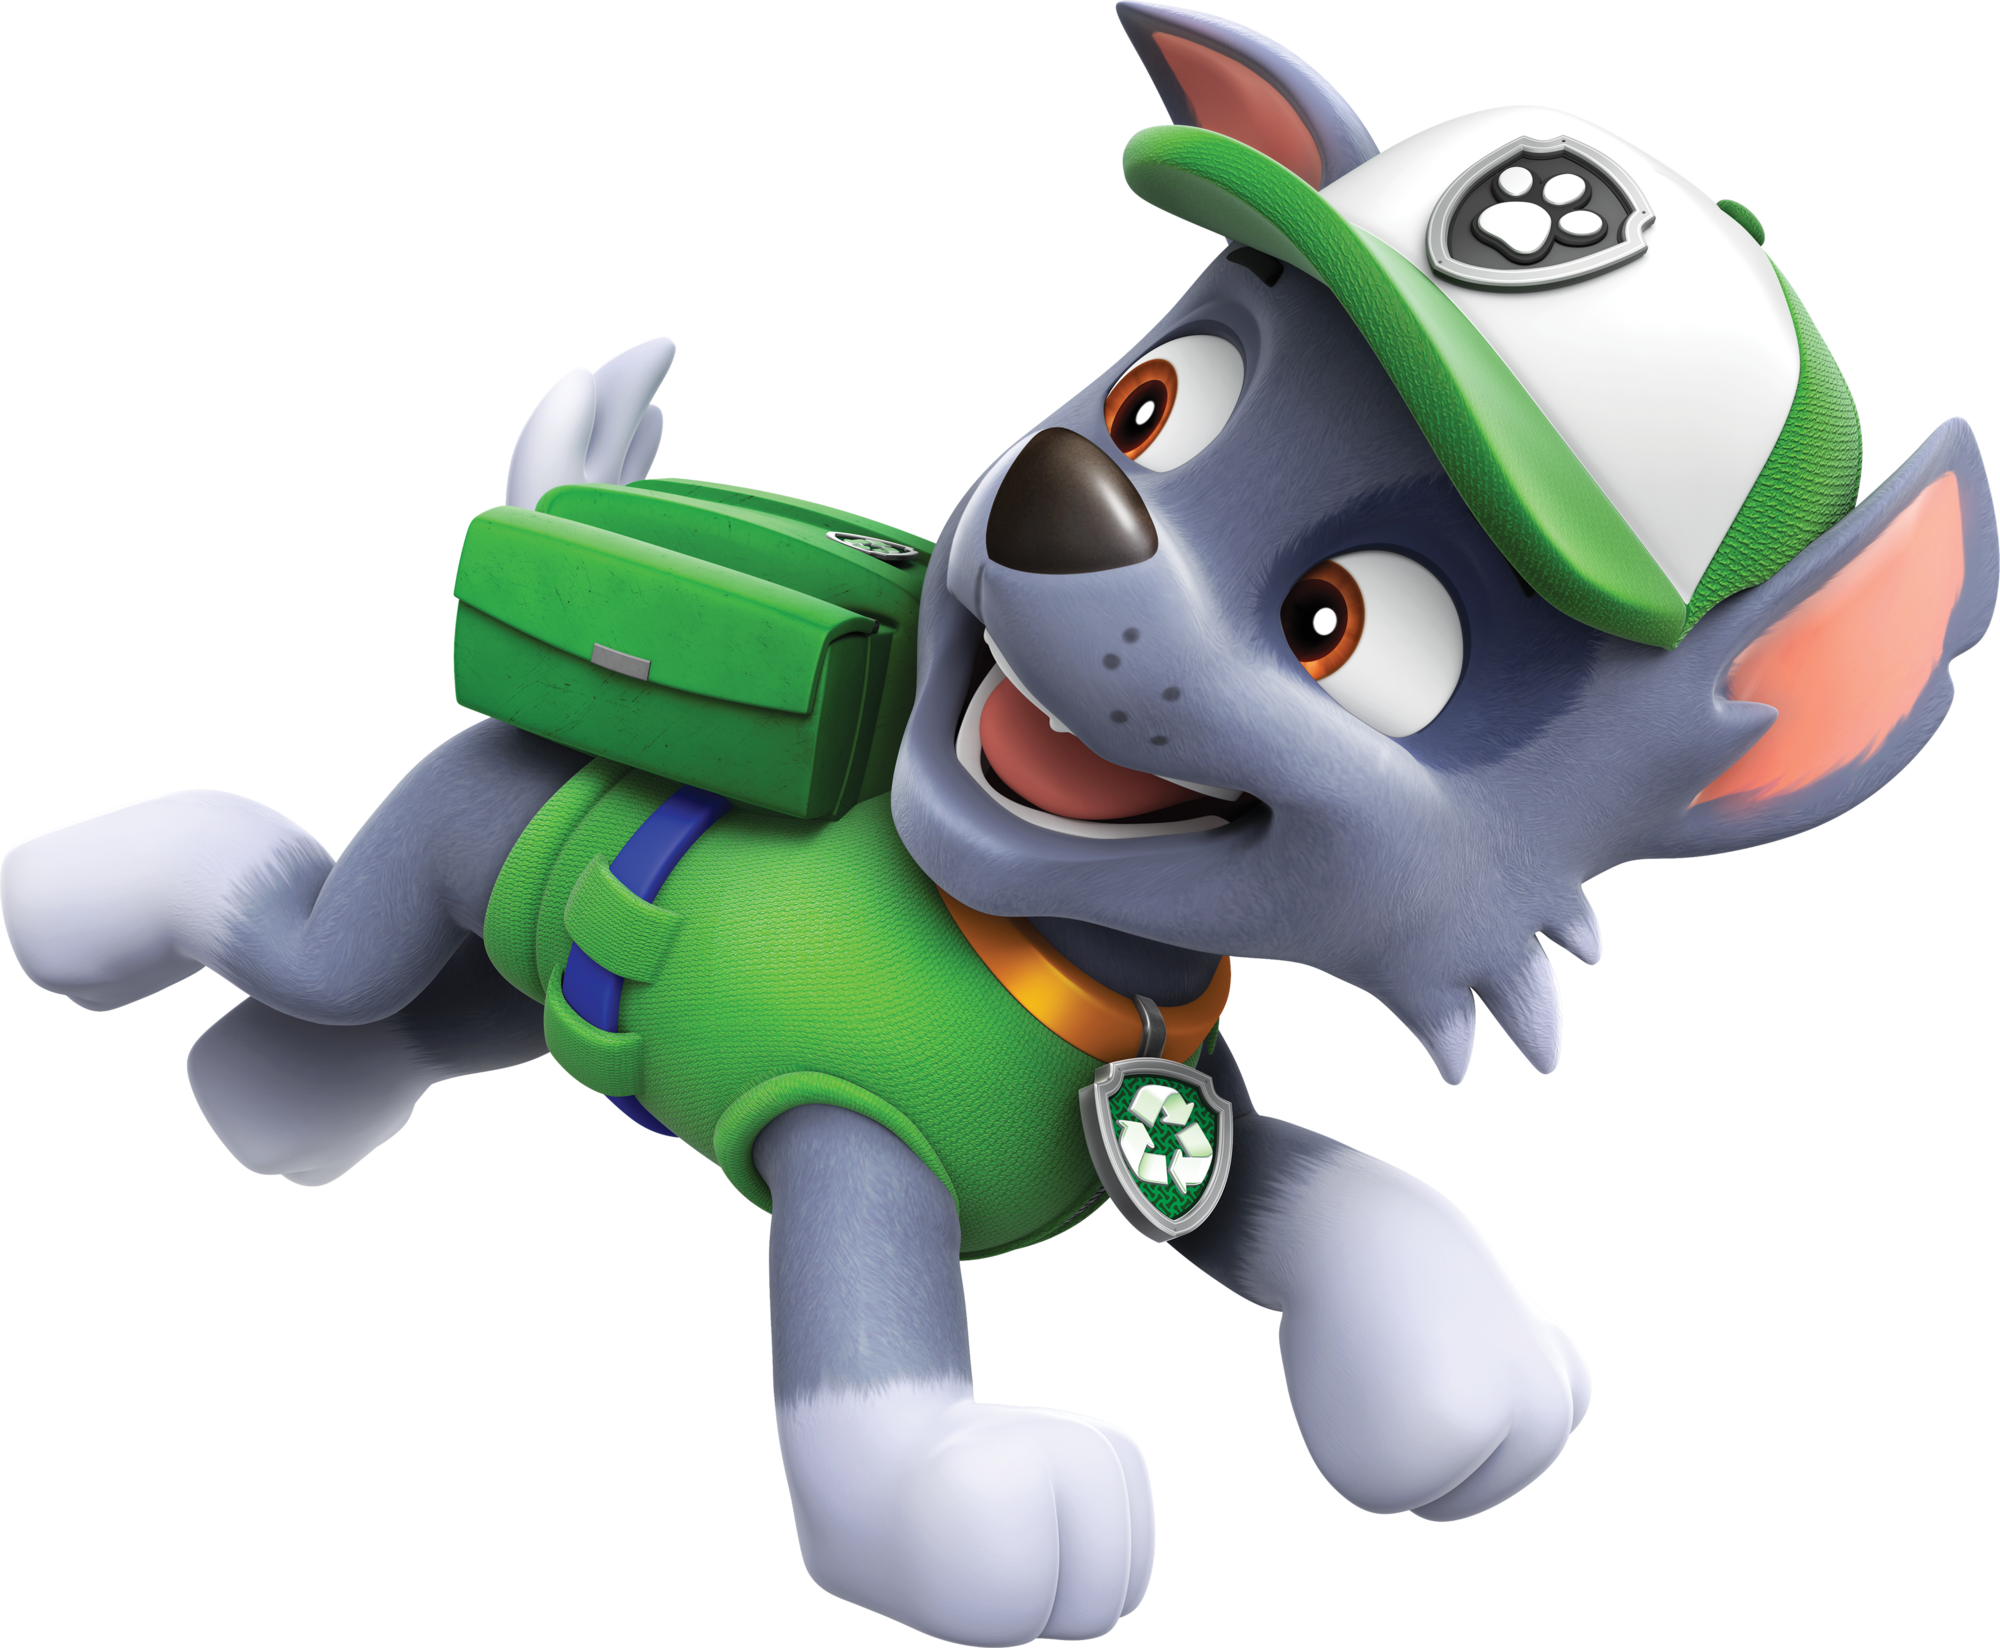 PAW Patrol Chase Standard.png